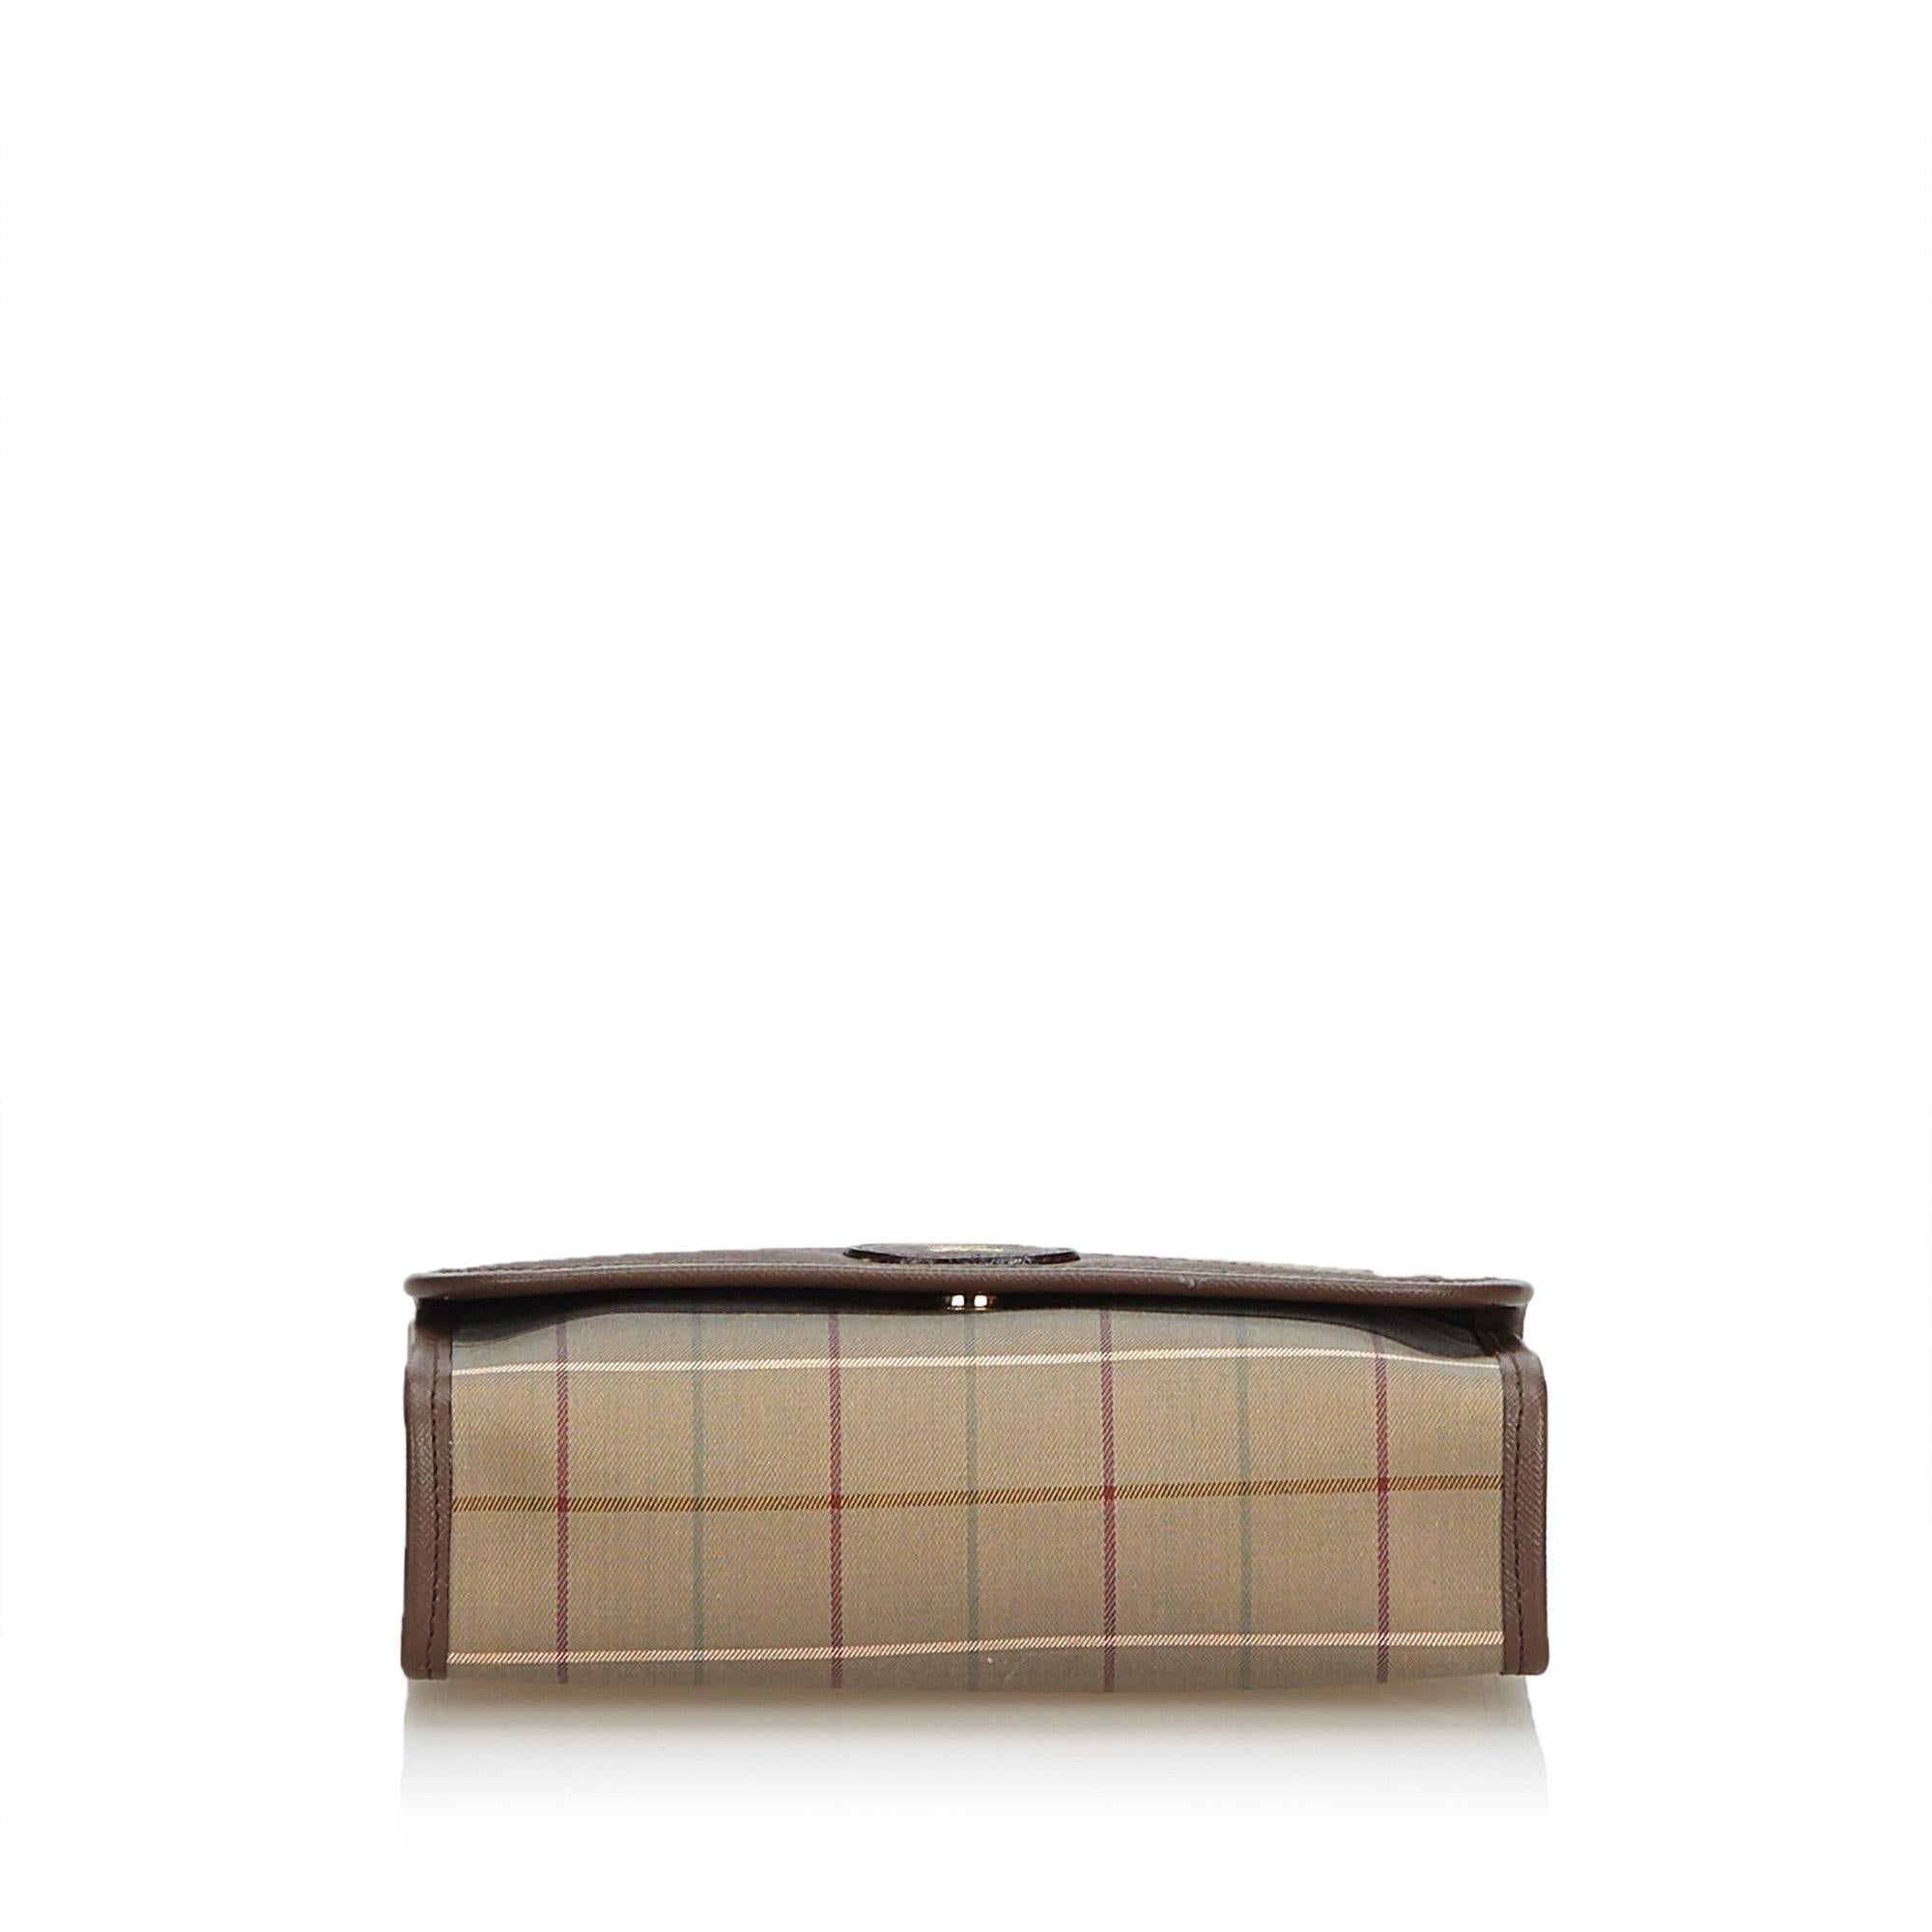 Women's Vintage Authentic Burberry Brown Plaid Clutch Bag United Kingdom w Box SMALL  For Sale